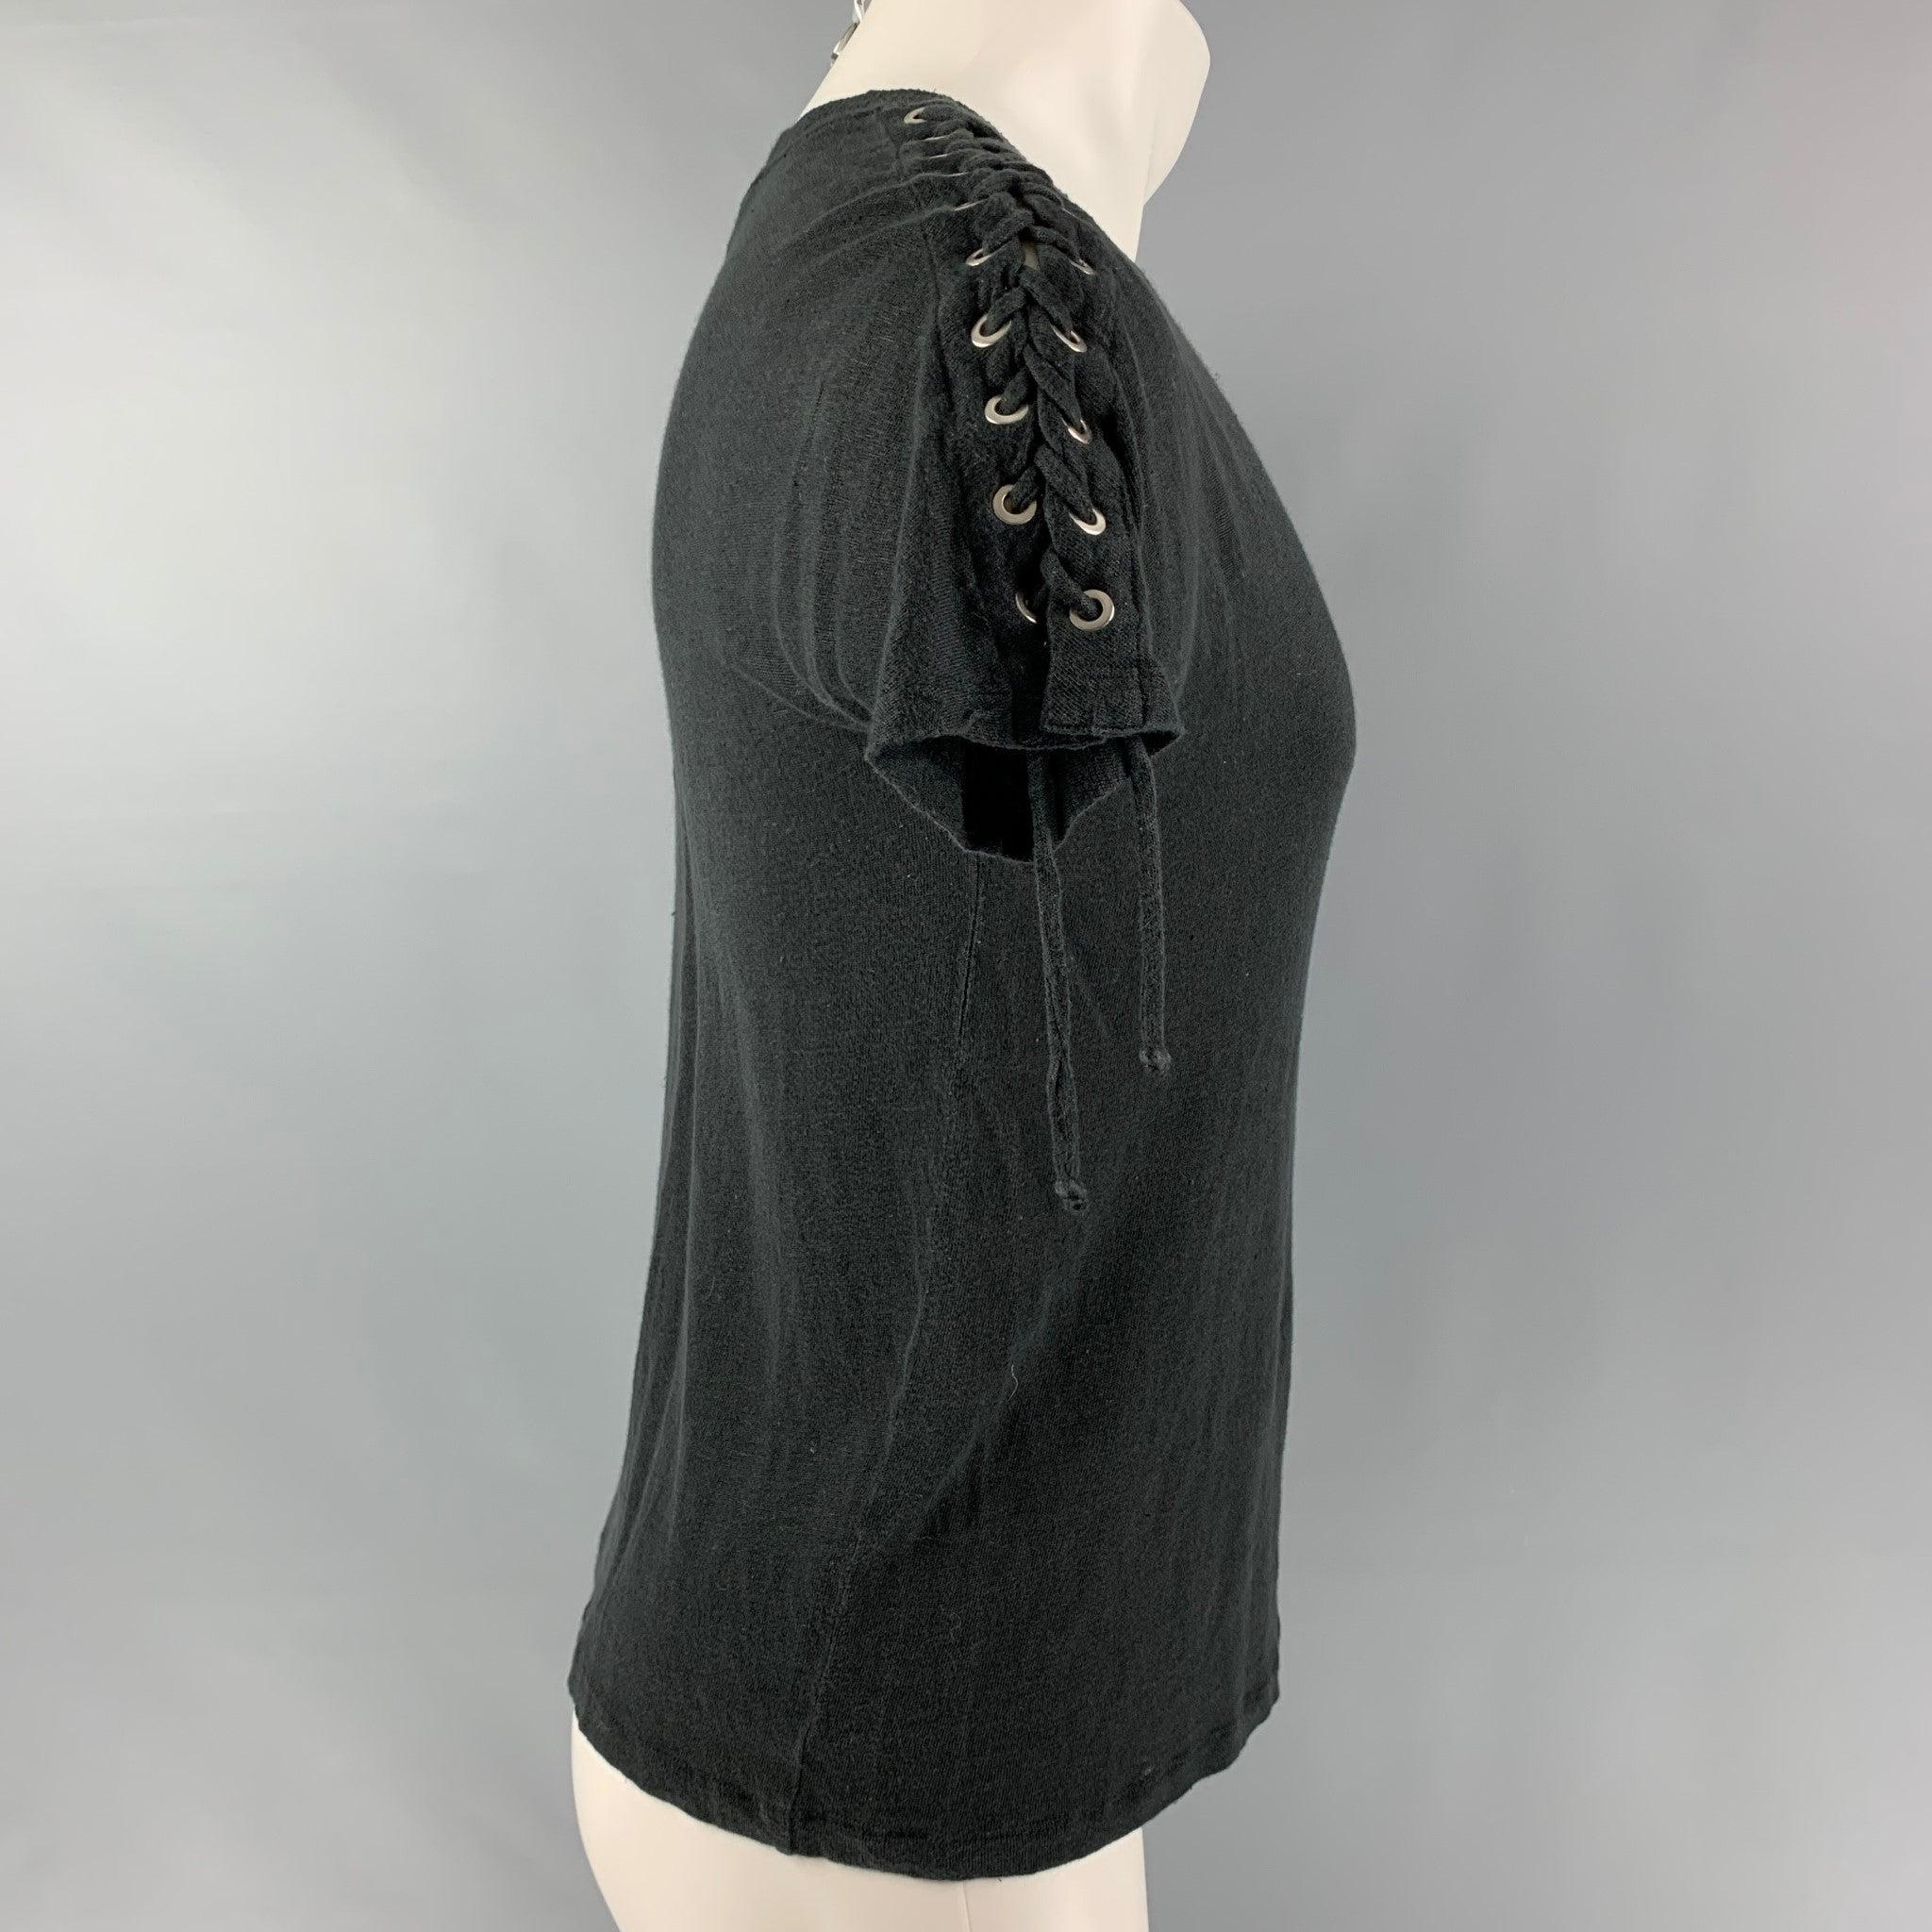 IRO Jeans Steiro T-shirt comes in a black linen jersey featuring a distressed style, laced detail on the shoulder seam, and a crew-neck.Excellent Pre-Owned Condition. 

Marked:   XS 

Measurements: 
 
Shoulder: 17 inches Chest: 50 inches Sleeve: 7